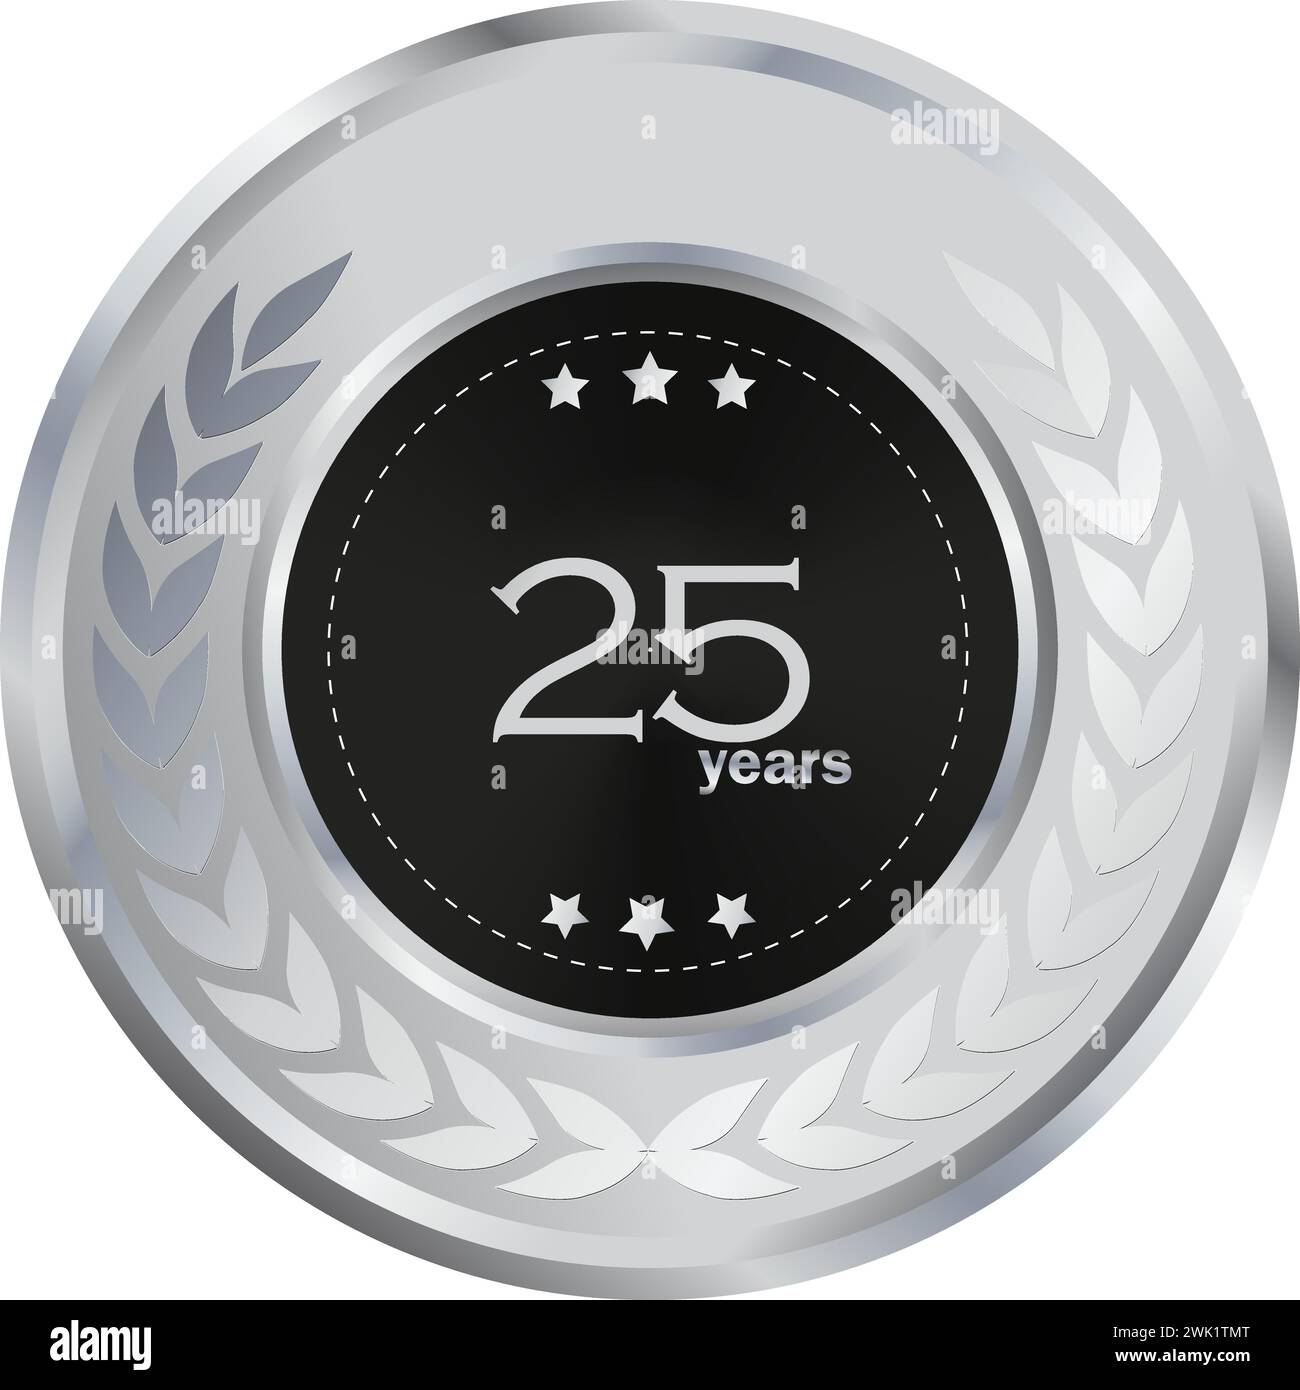 25th anniversary in Silver and Black, anniversary gift, 25th Year Anniversary Celebrating, Silver seal, Silver ring, birthday celebration Stock Vector